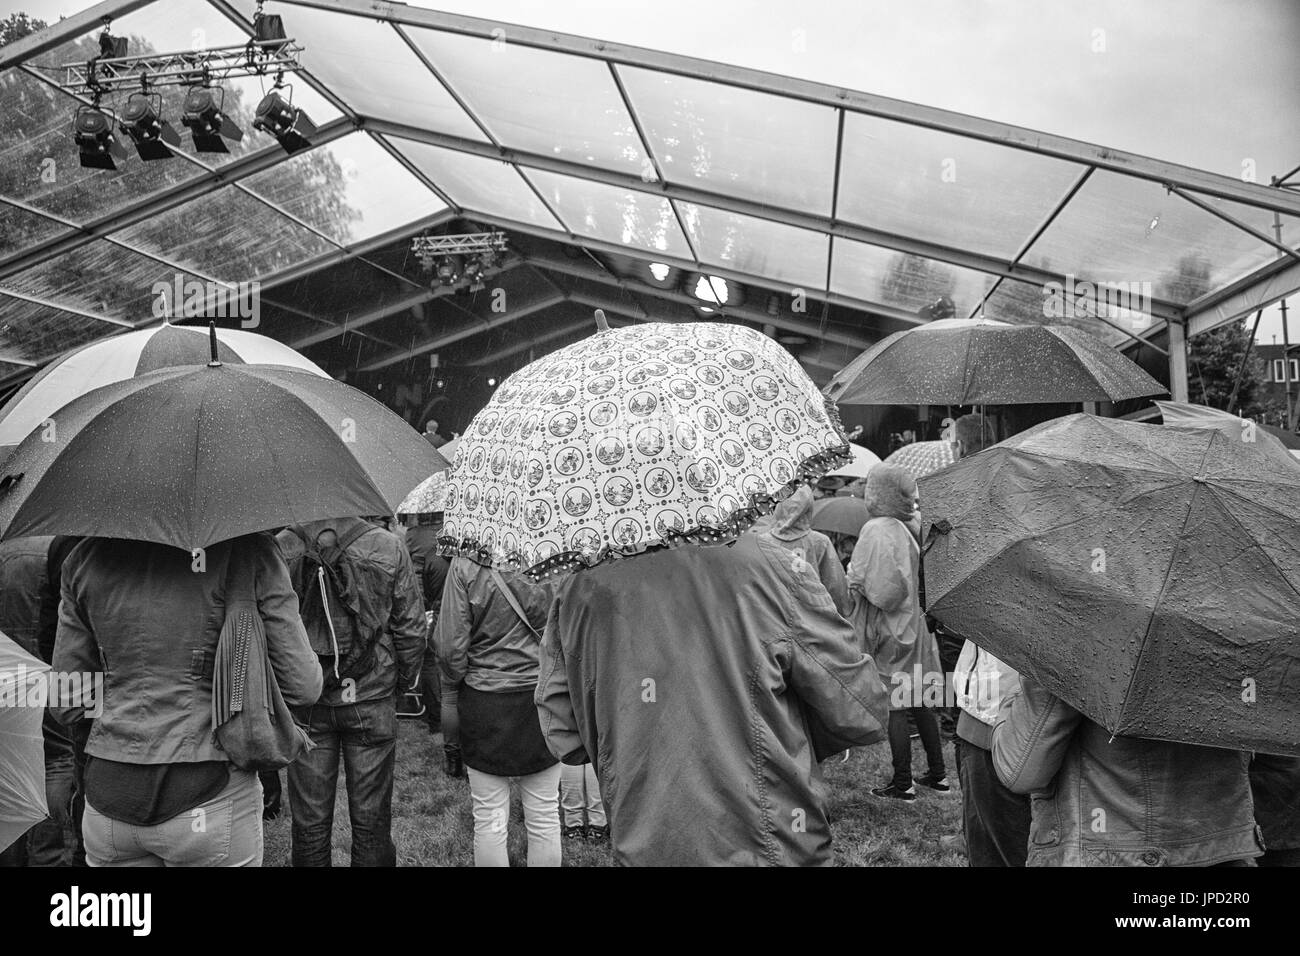 Group of people with umbrellas in the rain during a festival Stock Photo